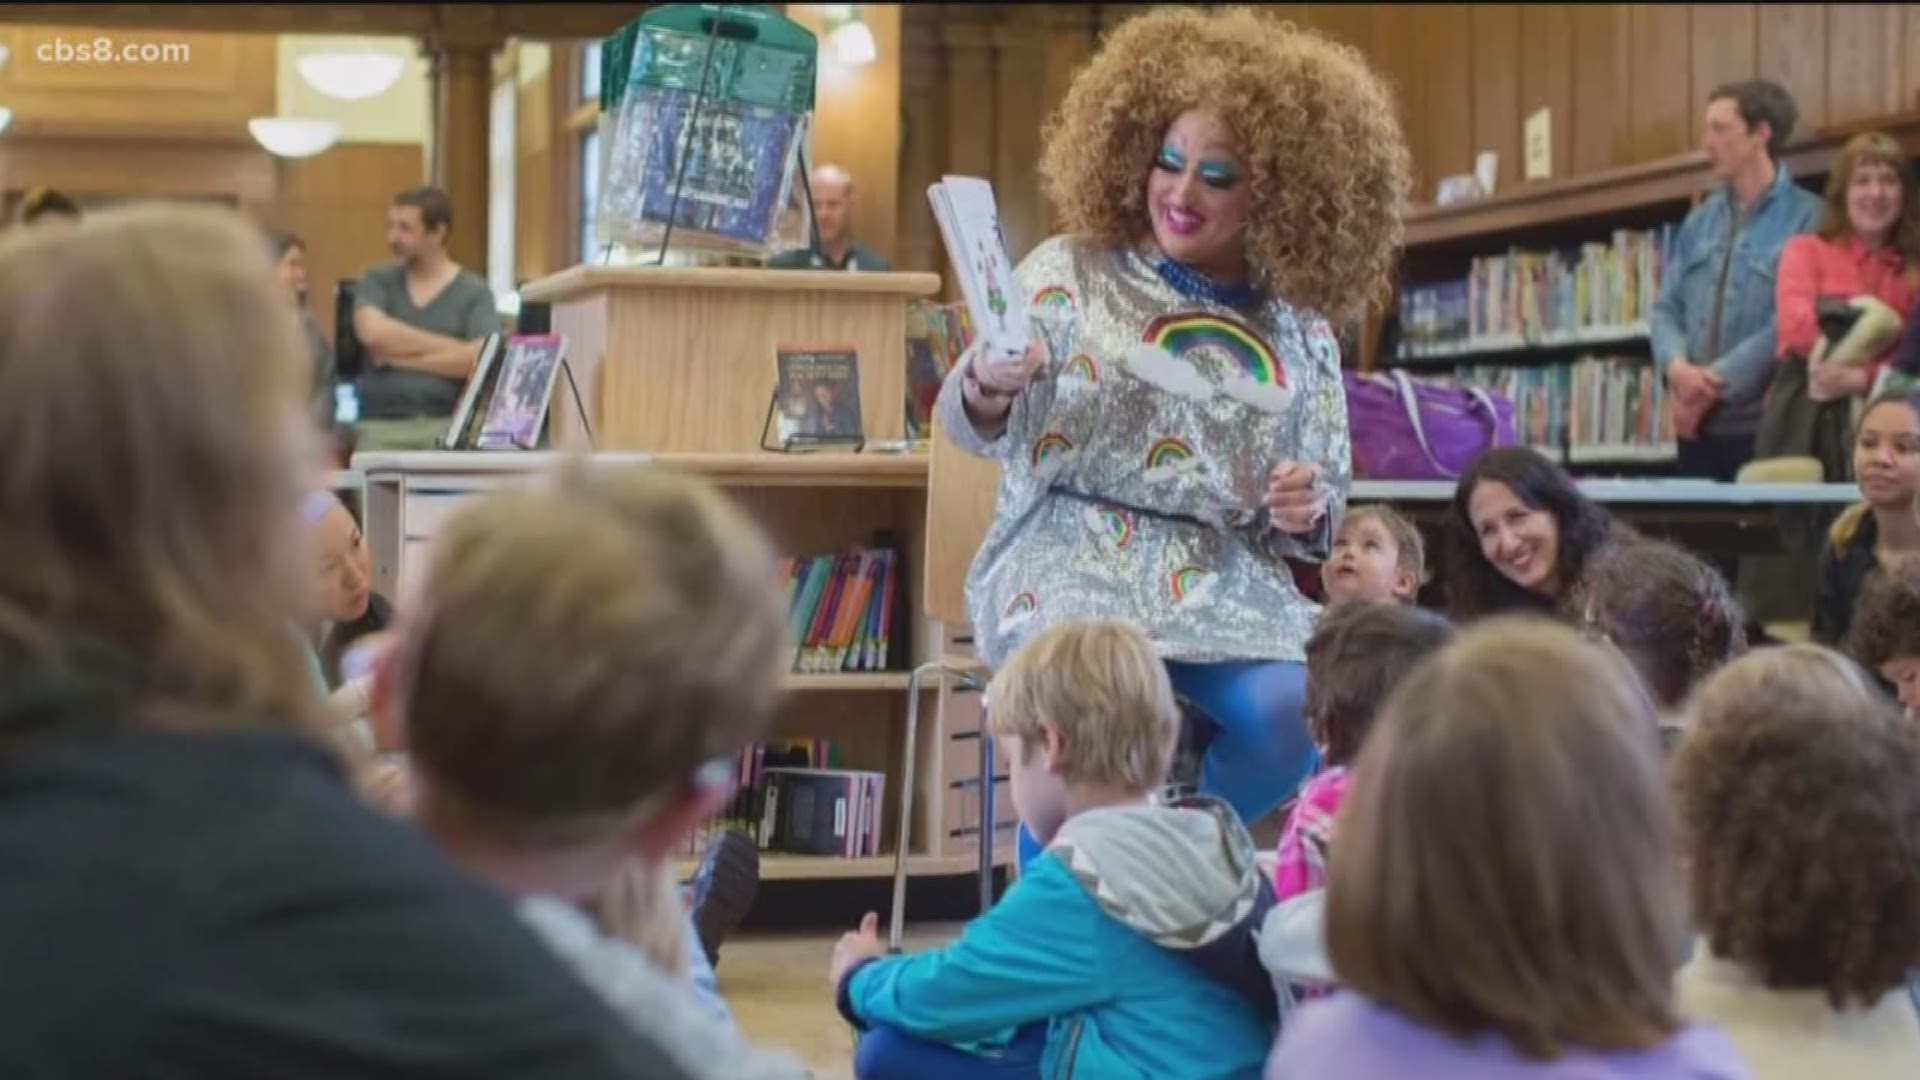 Drag Queen Story Hour was launched in San Francisco in 2015 and has since spread across the country.